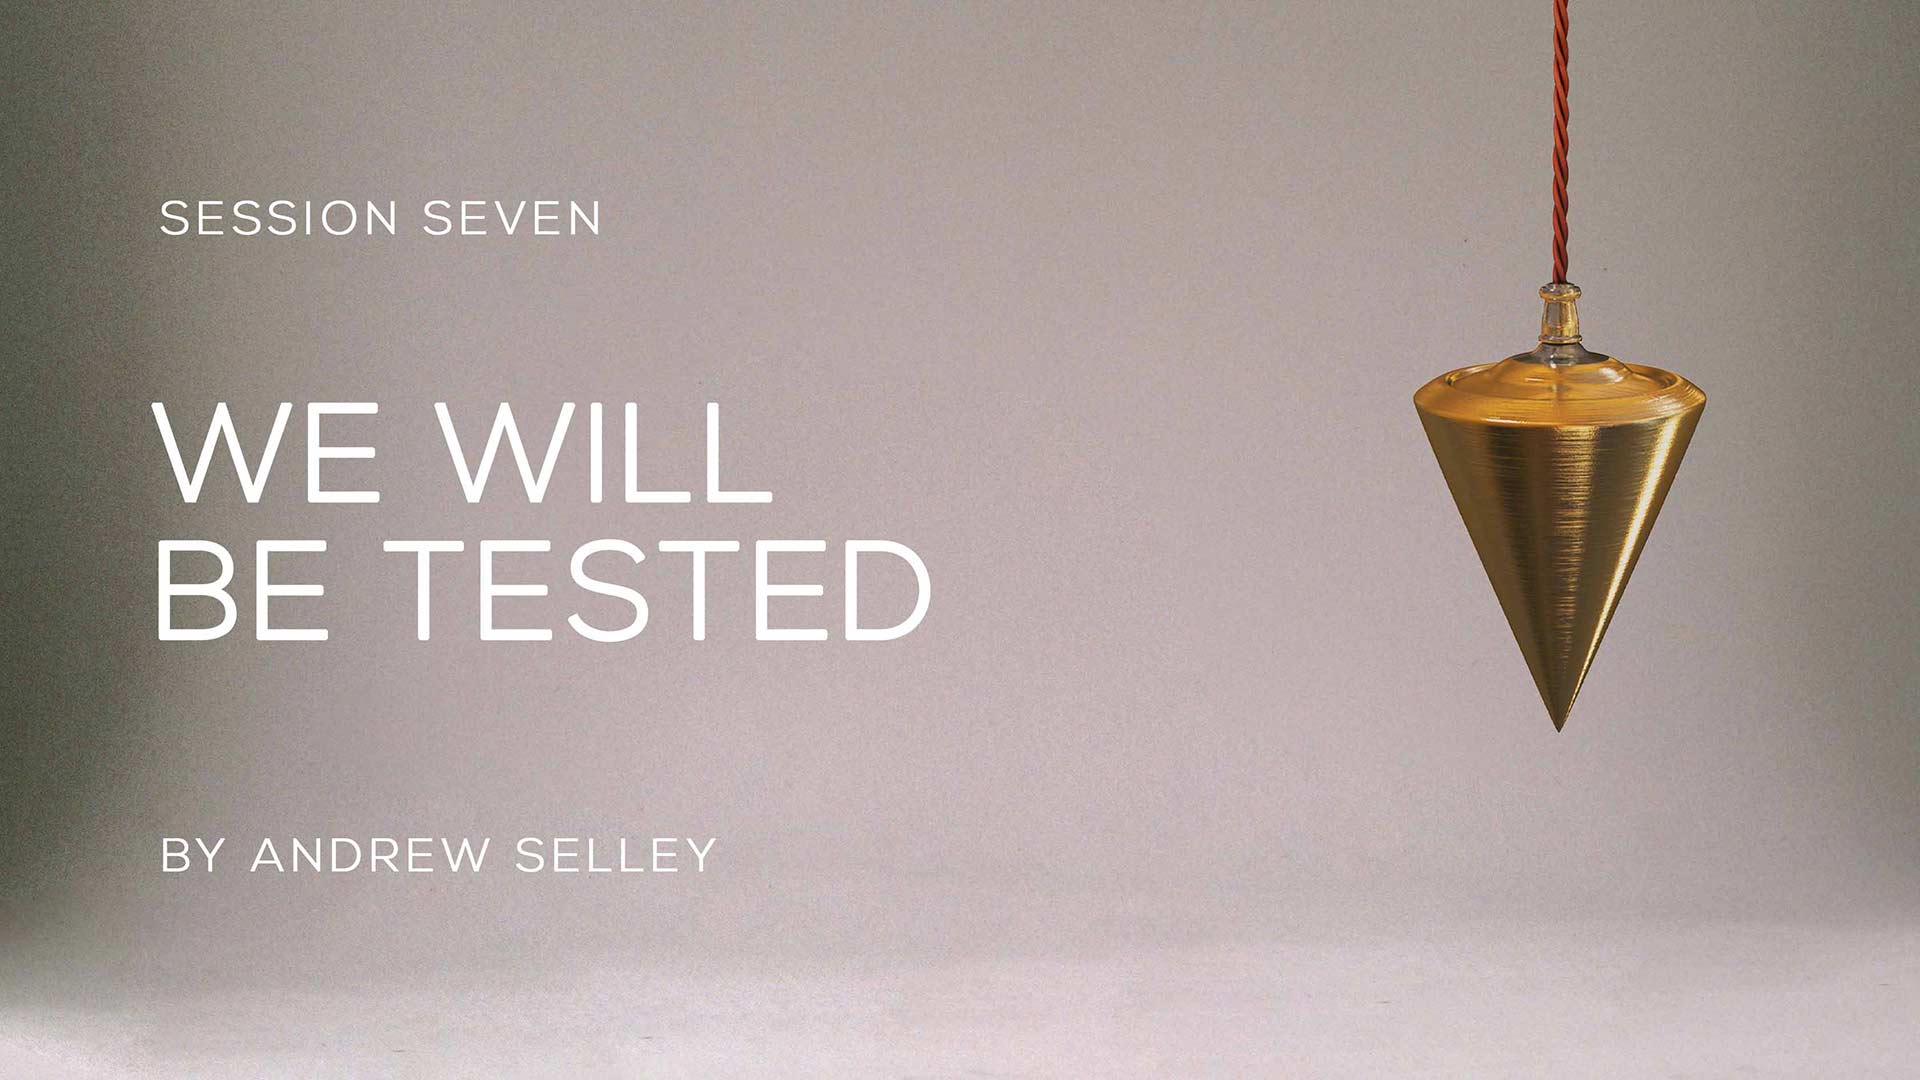 Video image for 'We Will Be Tested’ about times of testing